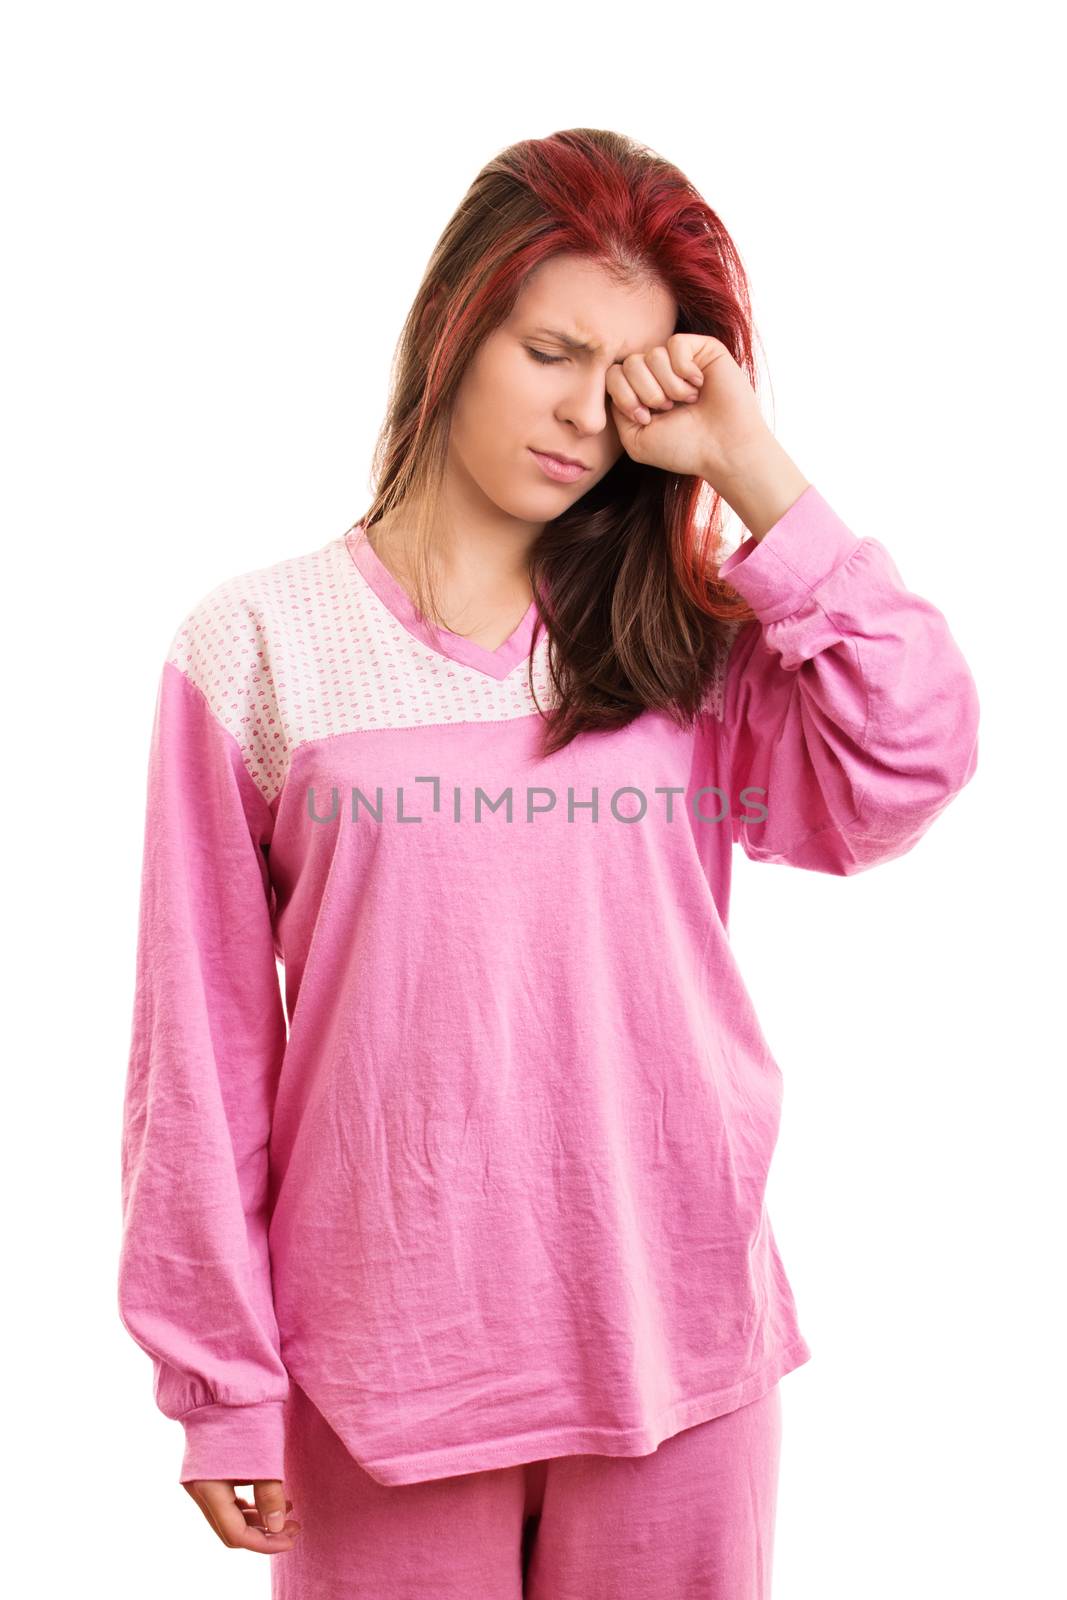 Leave me alone, I'm so sleepy. A portrait of a sleepy beautiful young girl in pink pajamas rubbing her eye, isolated on white background.